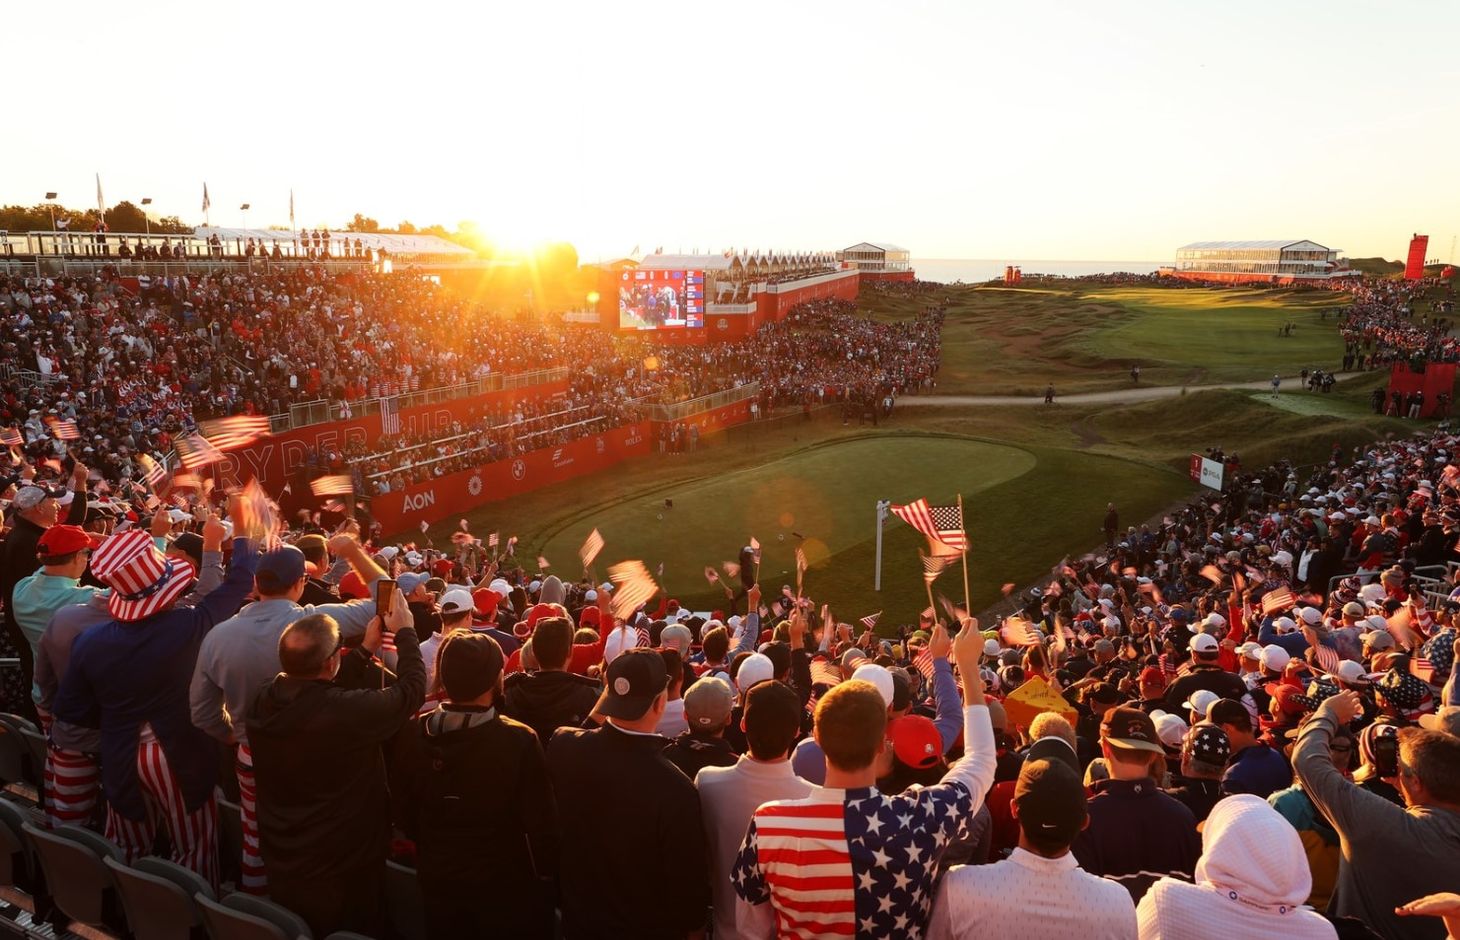 Americans win Ryder Cup in a rout